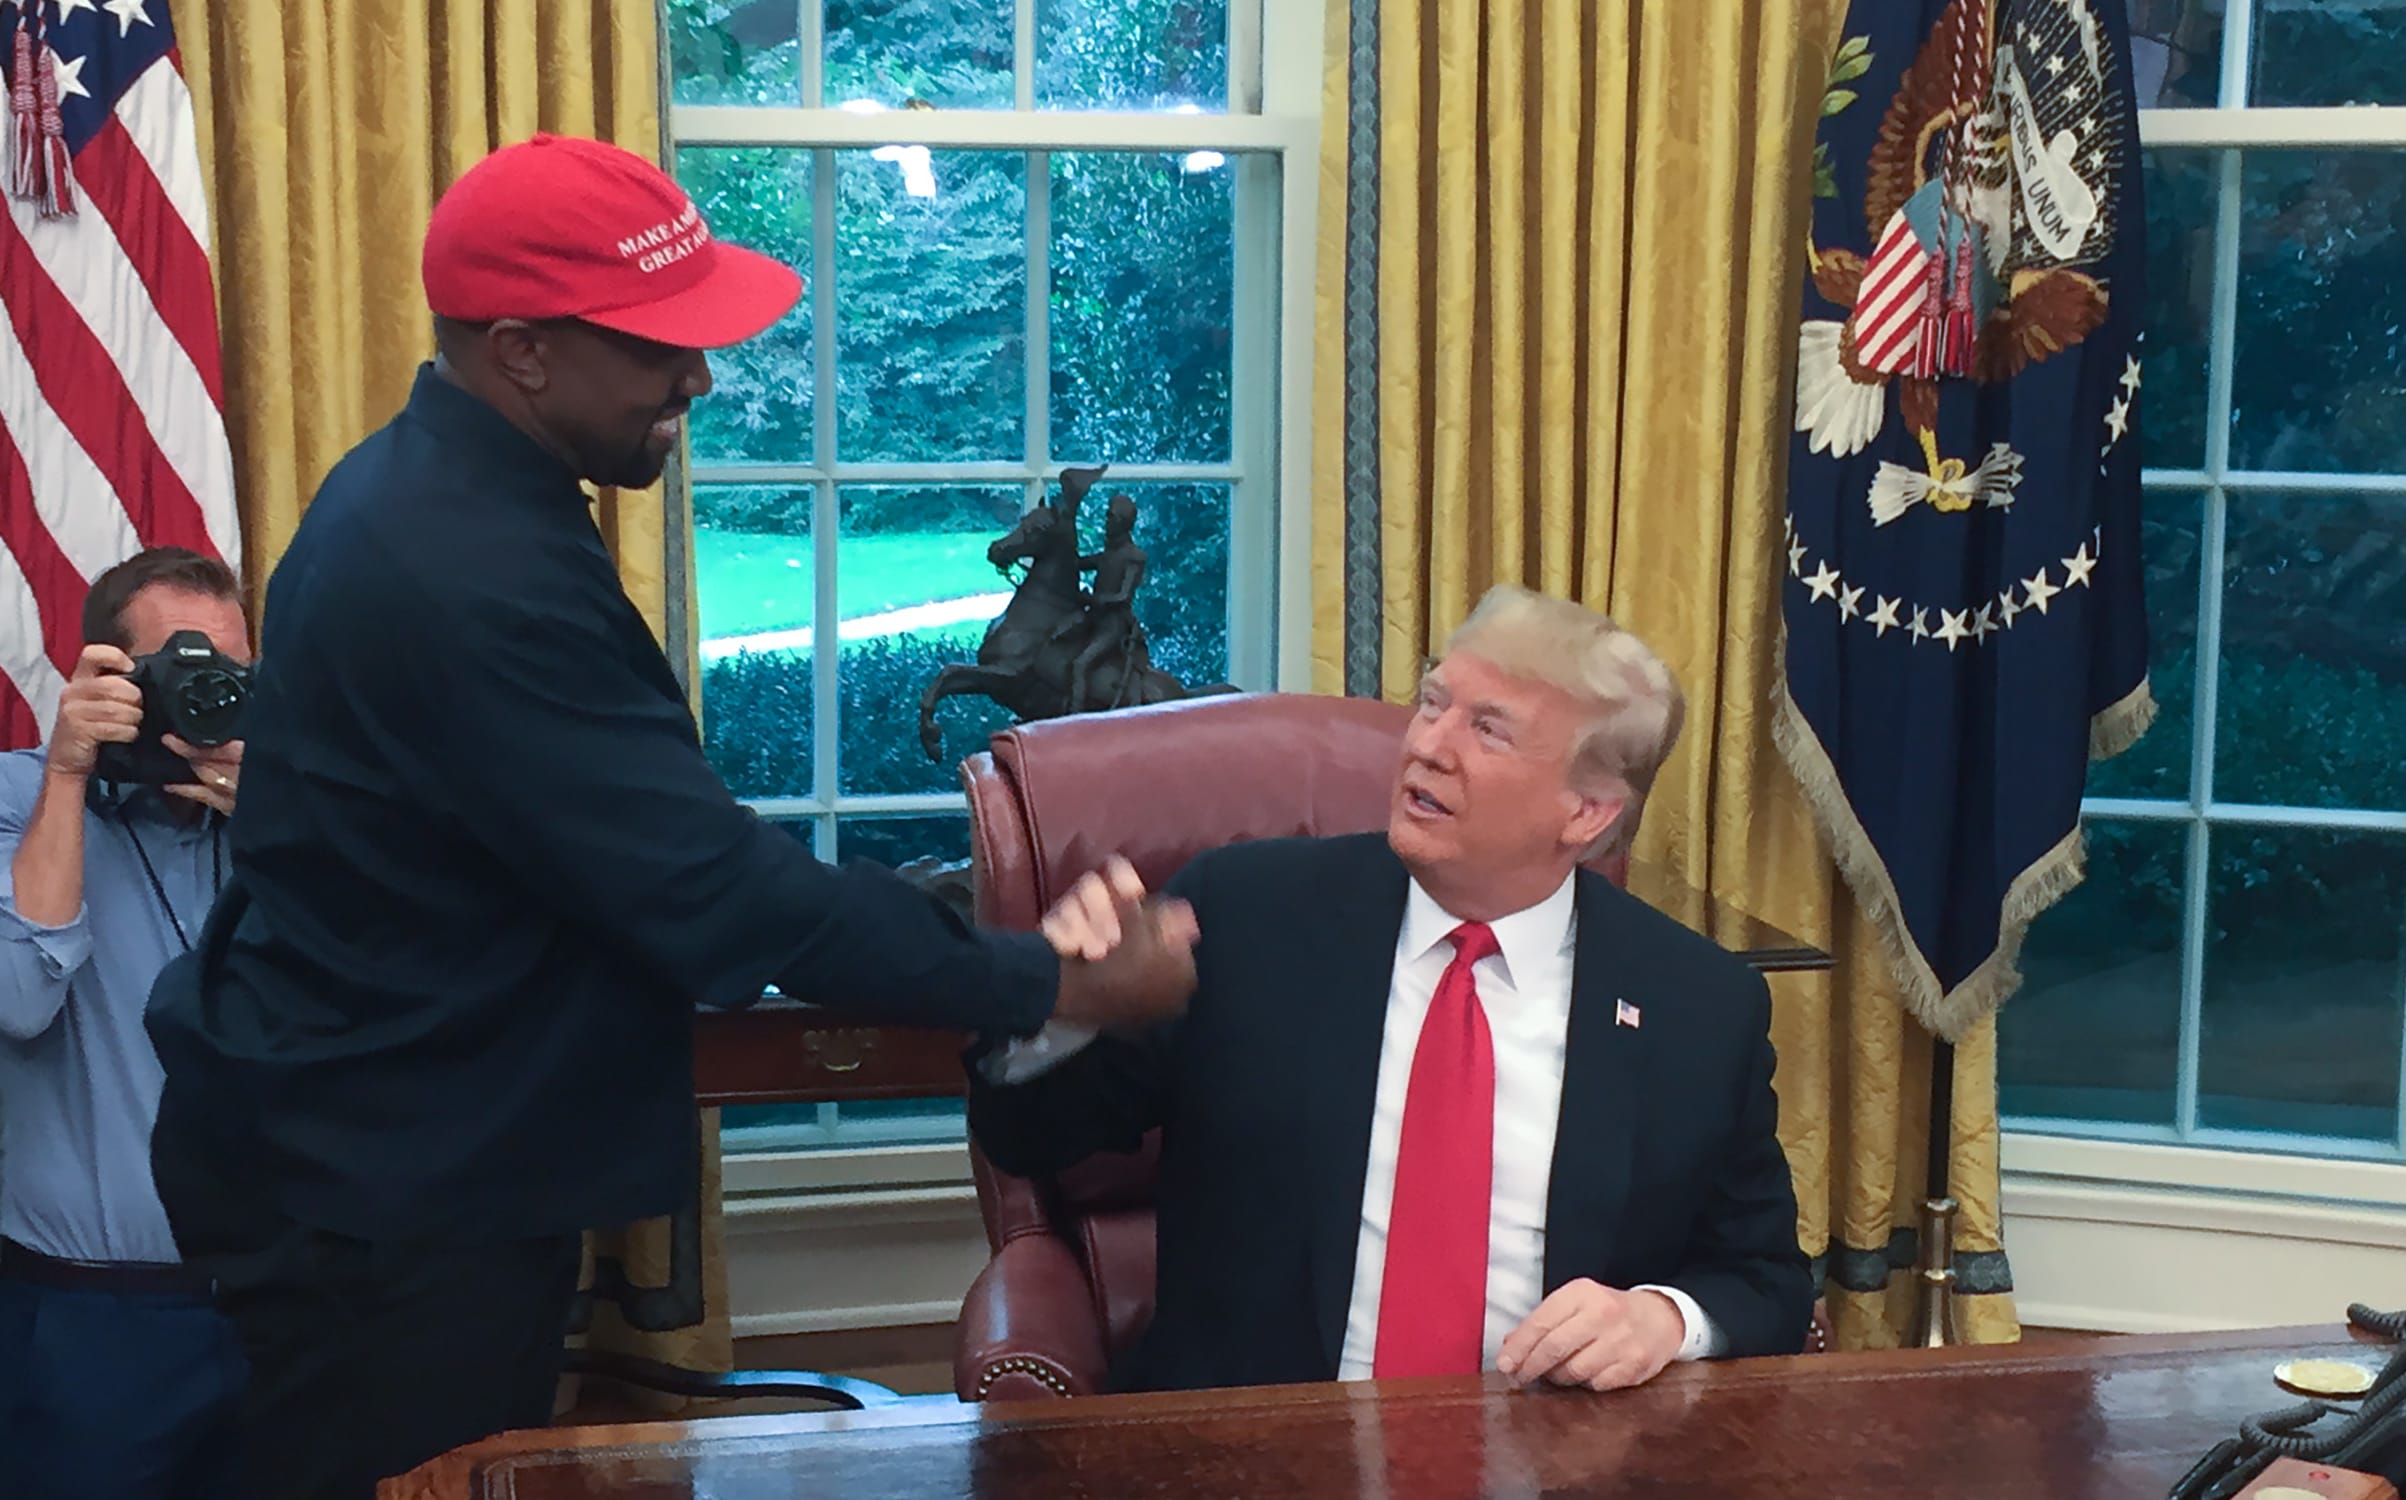 US President Donald Trump meets with rapper Kanye West in the Oval Office.